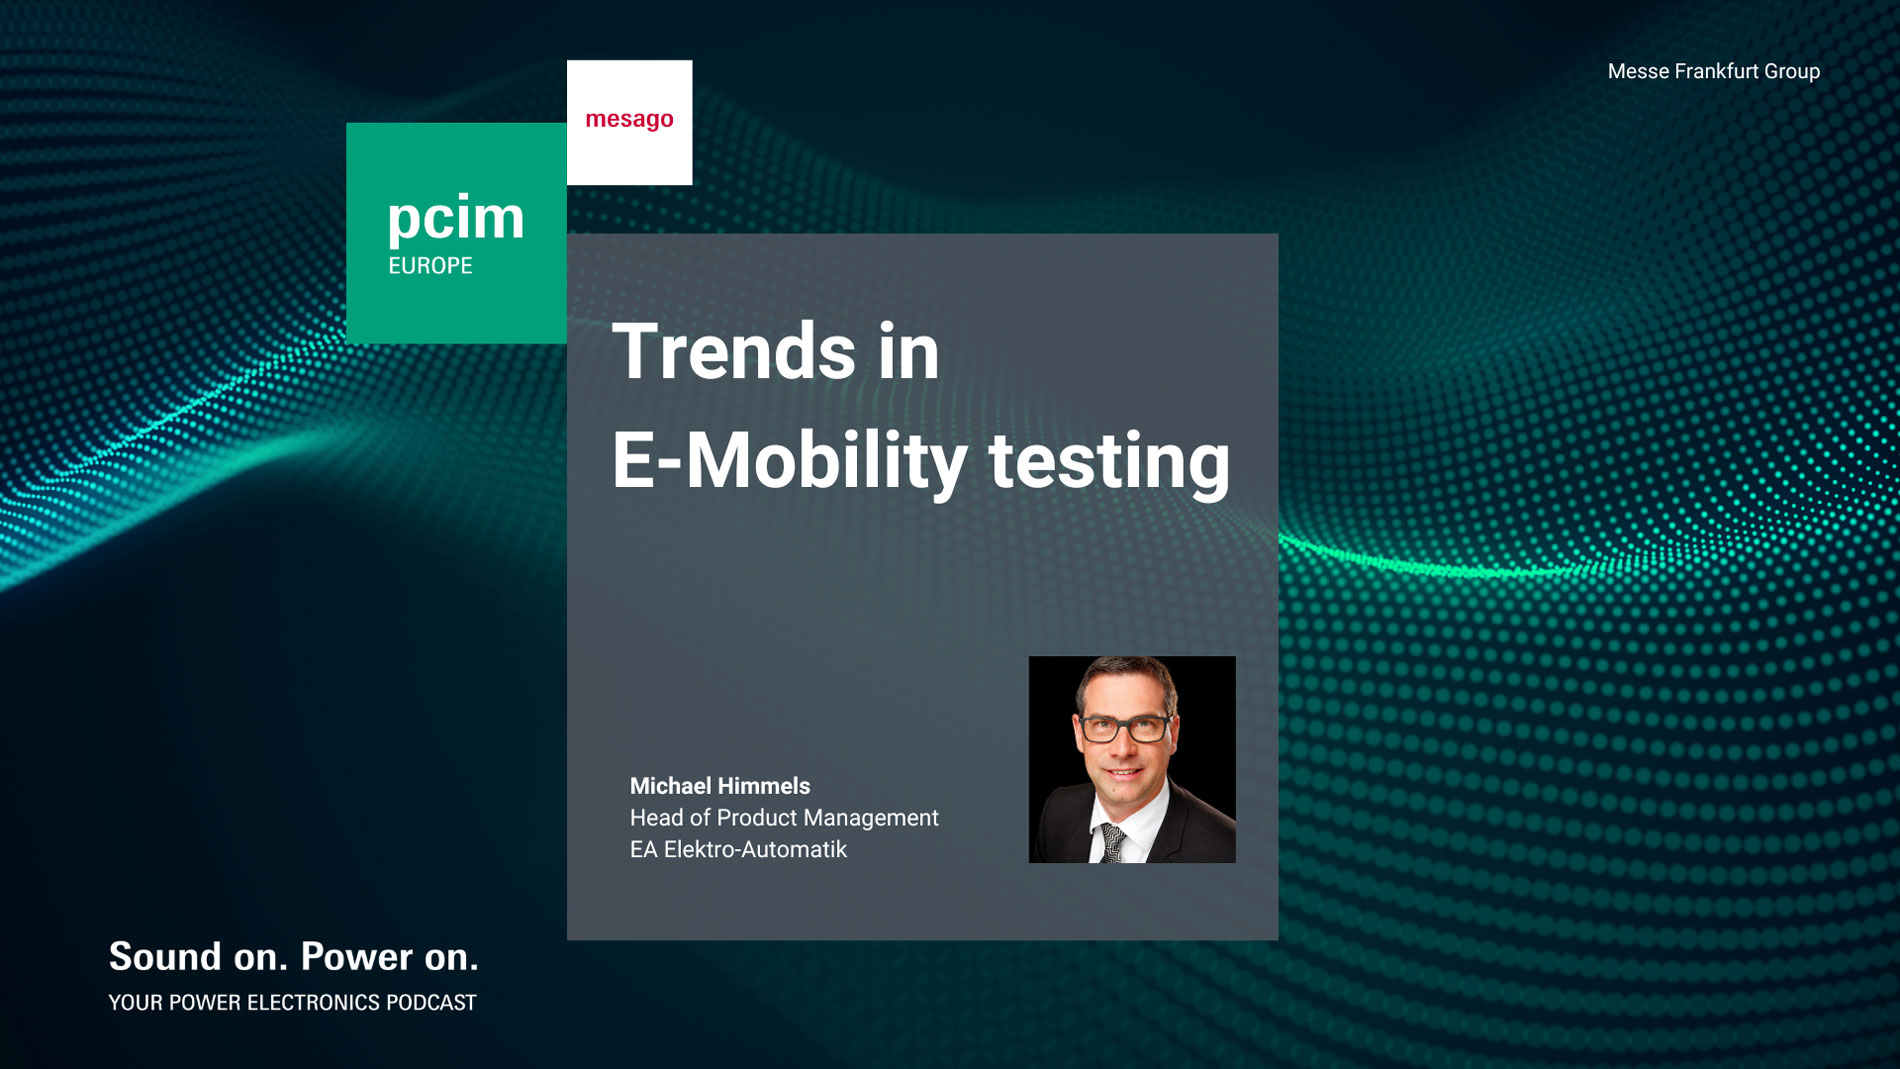 Michael Himmels from EA Elektro-Automatik on trends and issues in E-Mobility testing